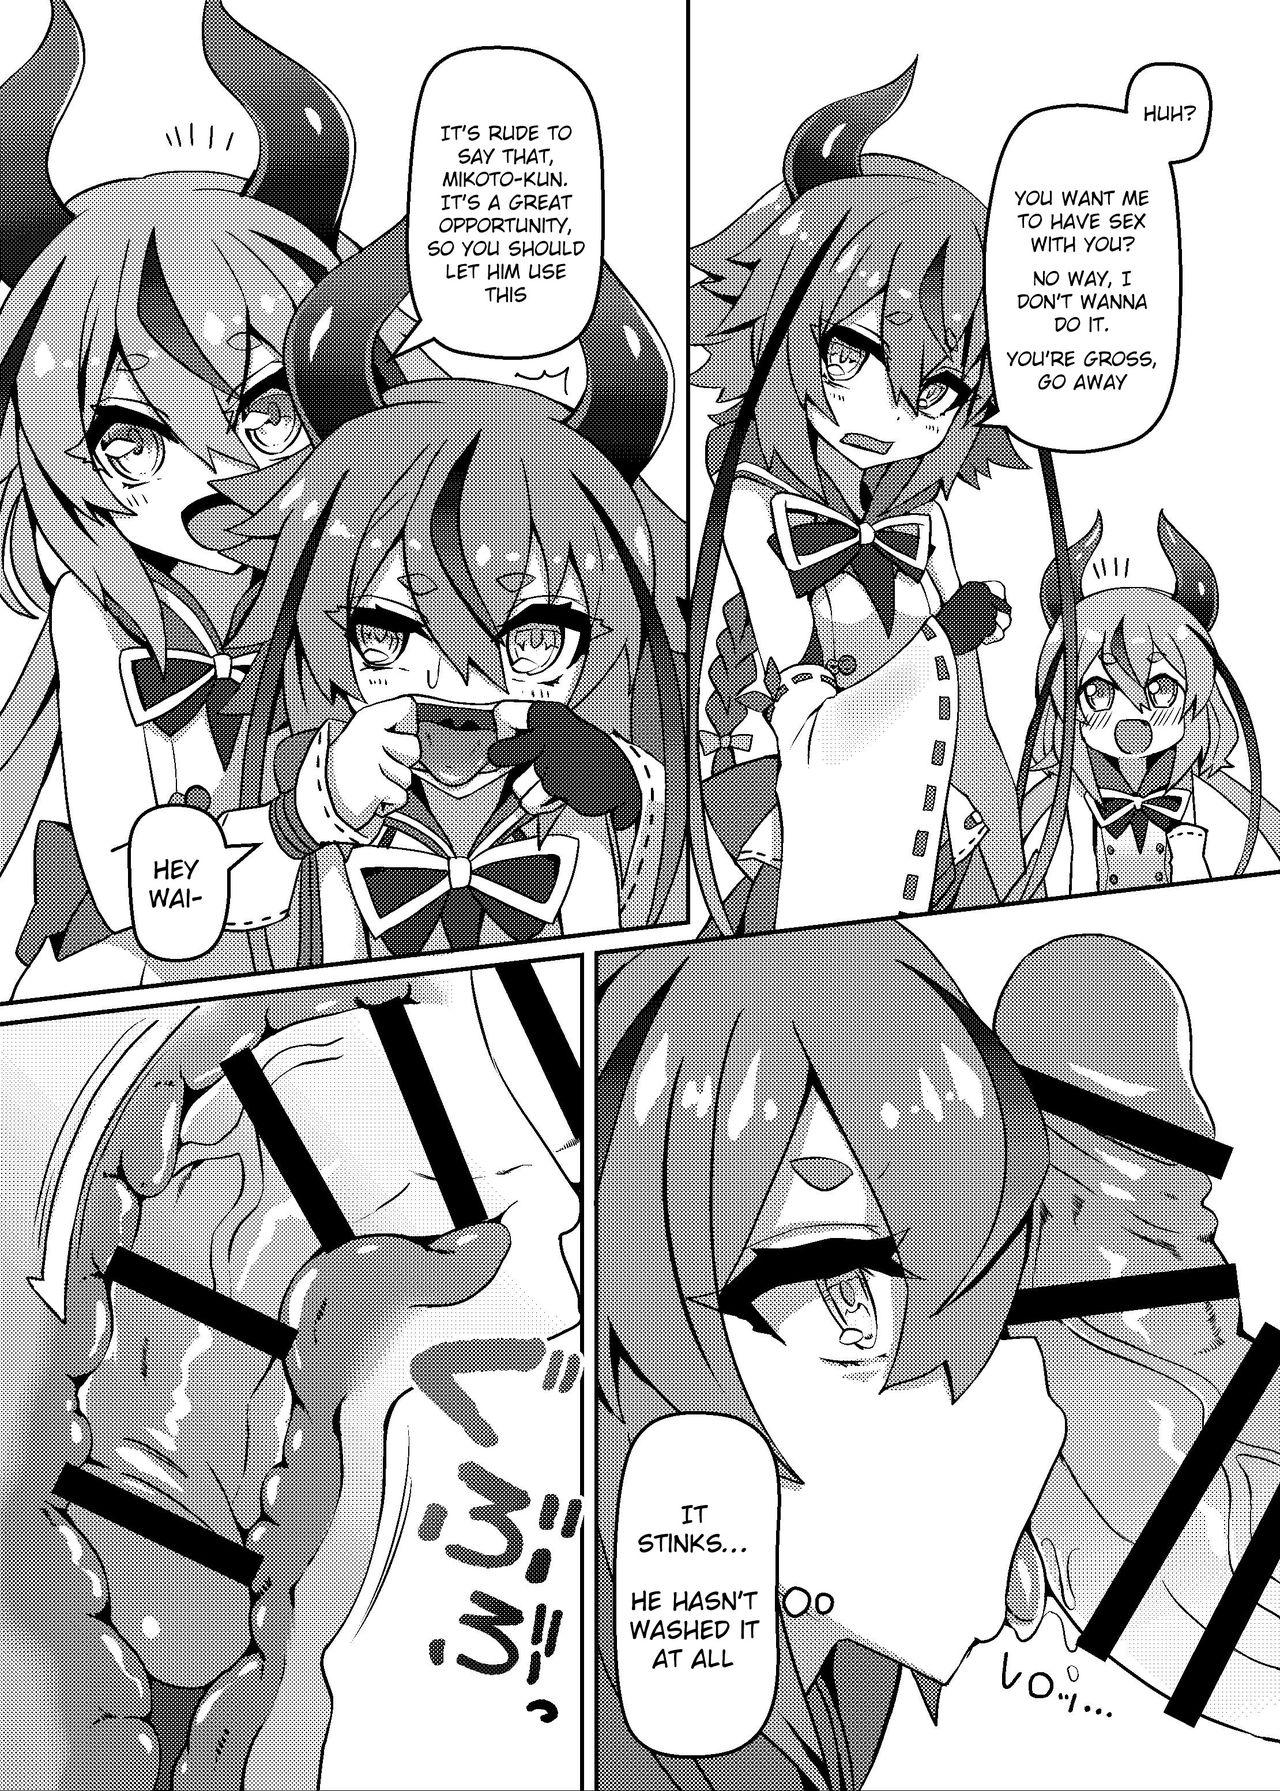 Passionate Talk Character Okuchi Only Book - Vocaloid Voiceroid Sucks - Page 2